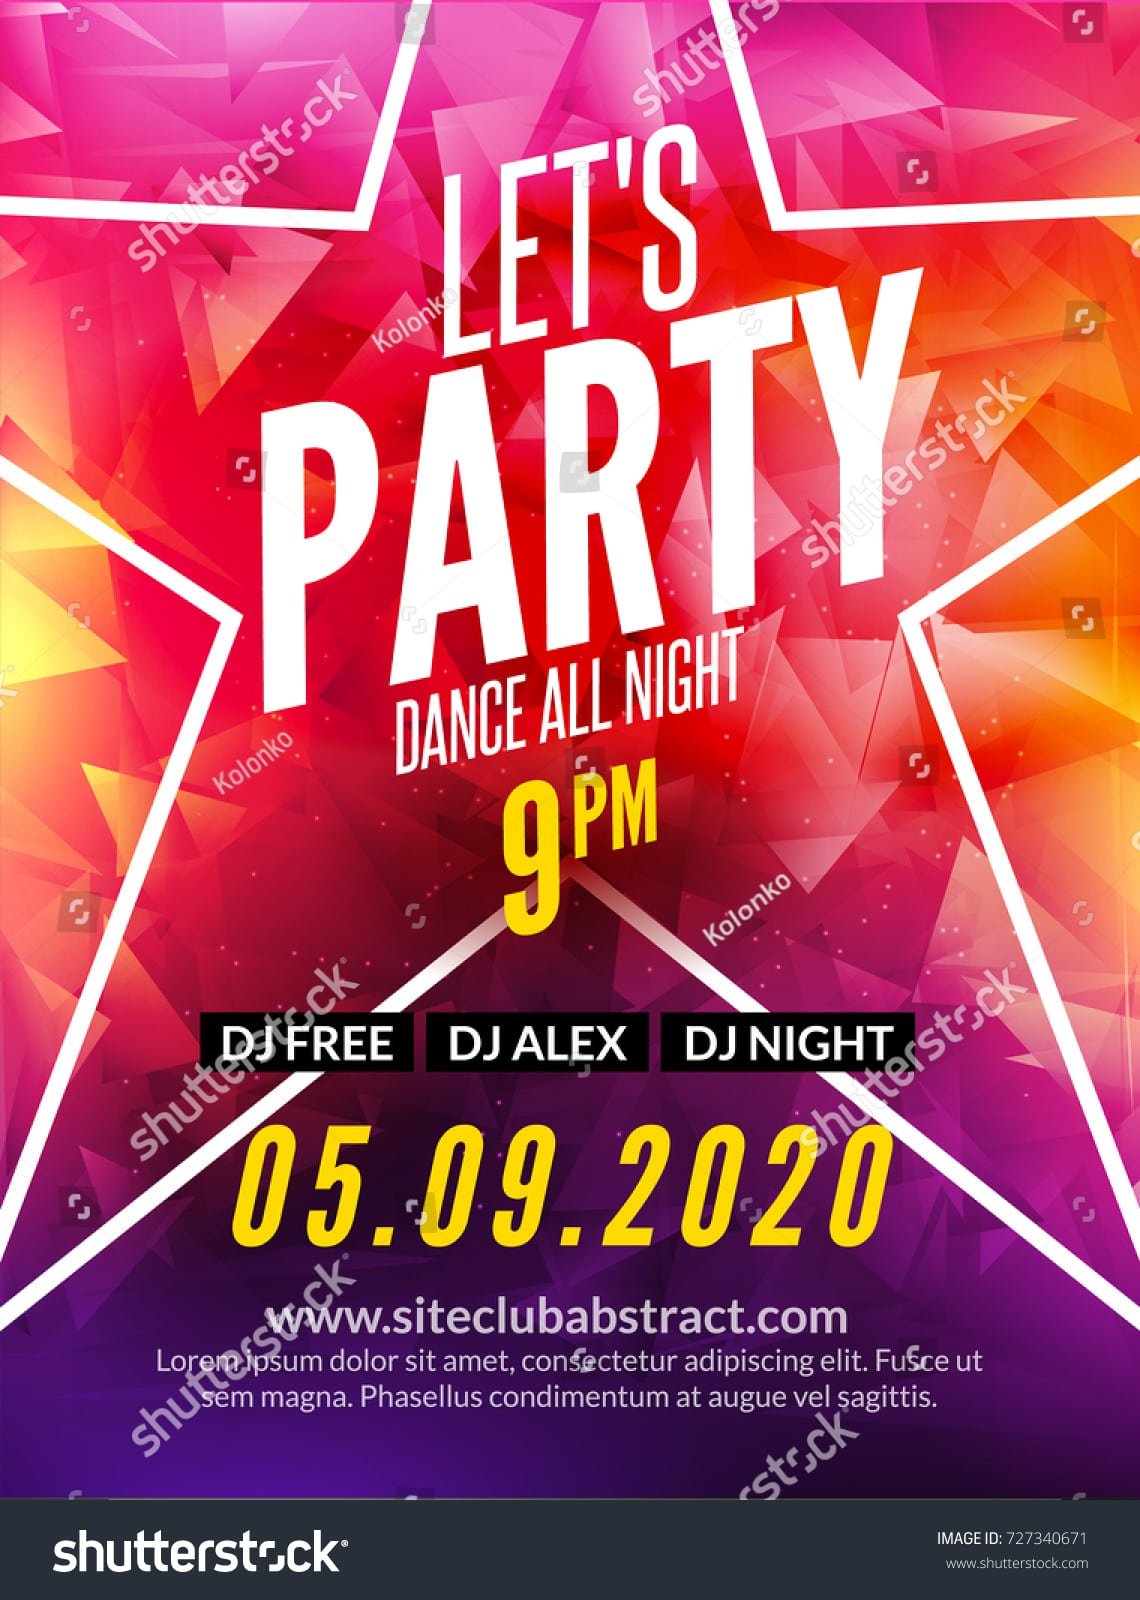 Lets Party Design Poster Night Club Stock Vector 727340671